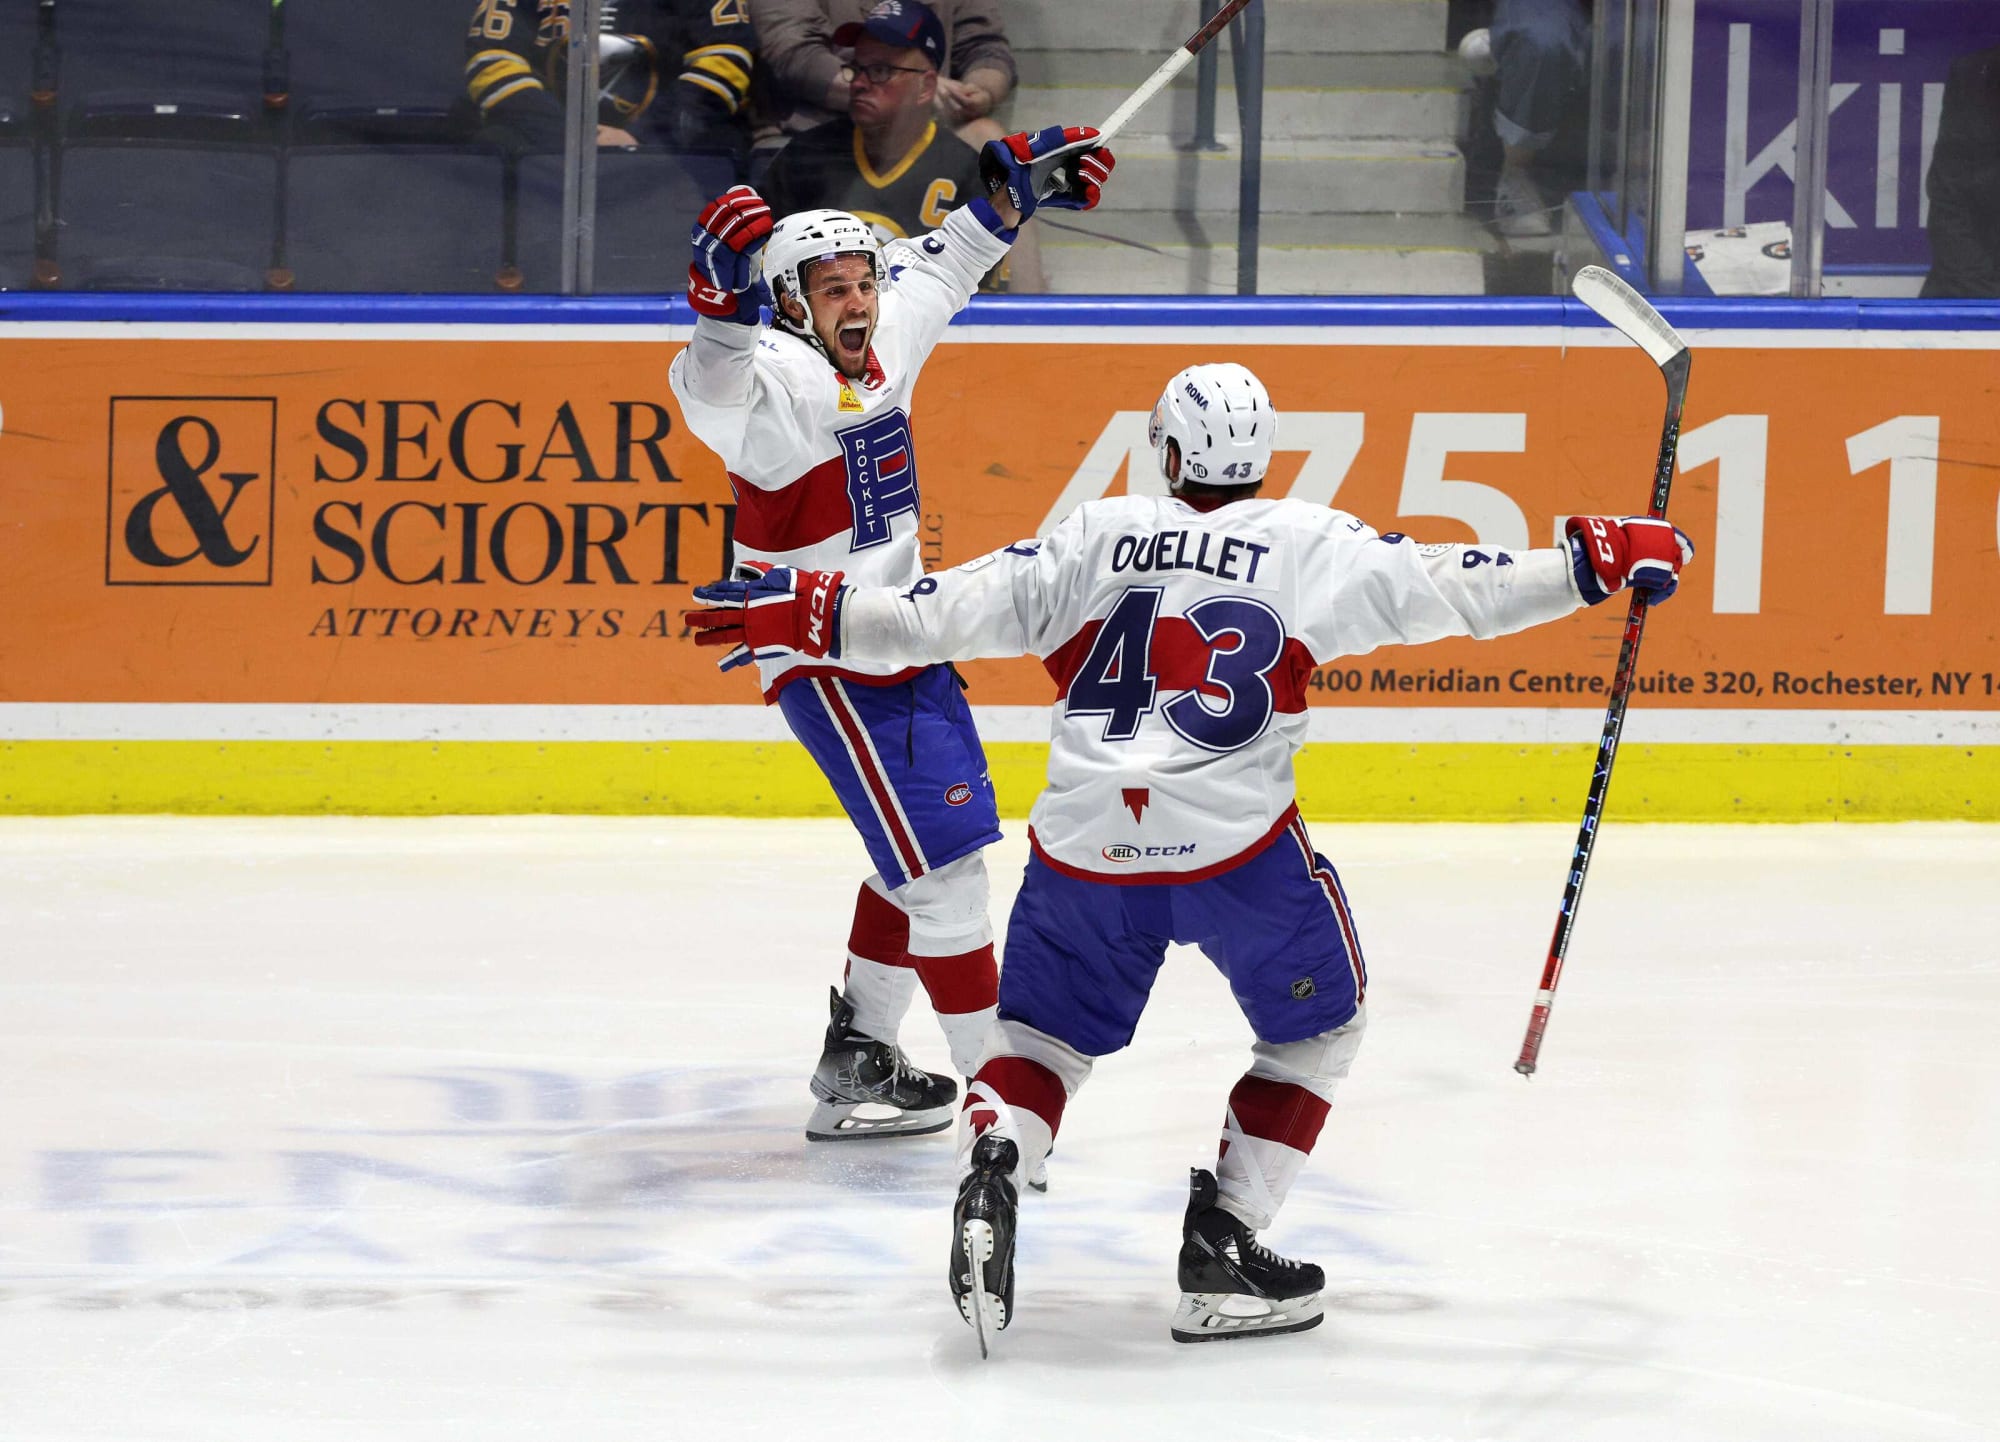 Laval to host 2022 AHL All-Star Game after cancellation of next